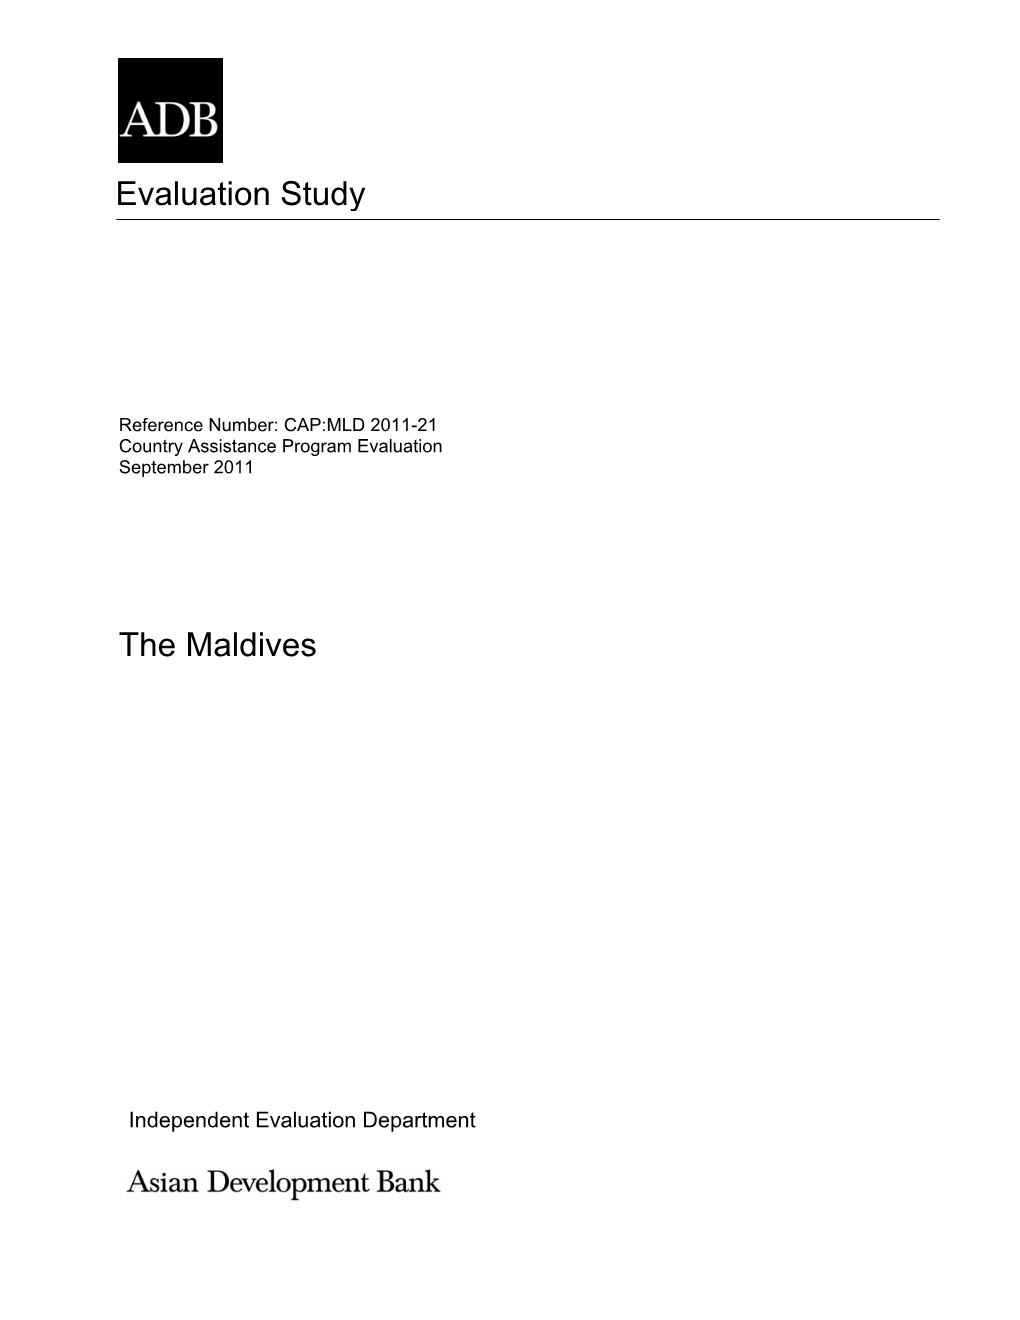 Country Assistance Program Evaluation for the Maldives